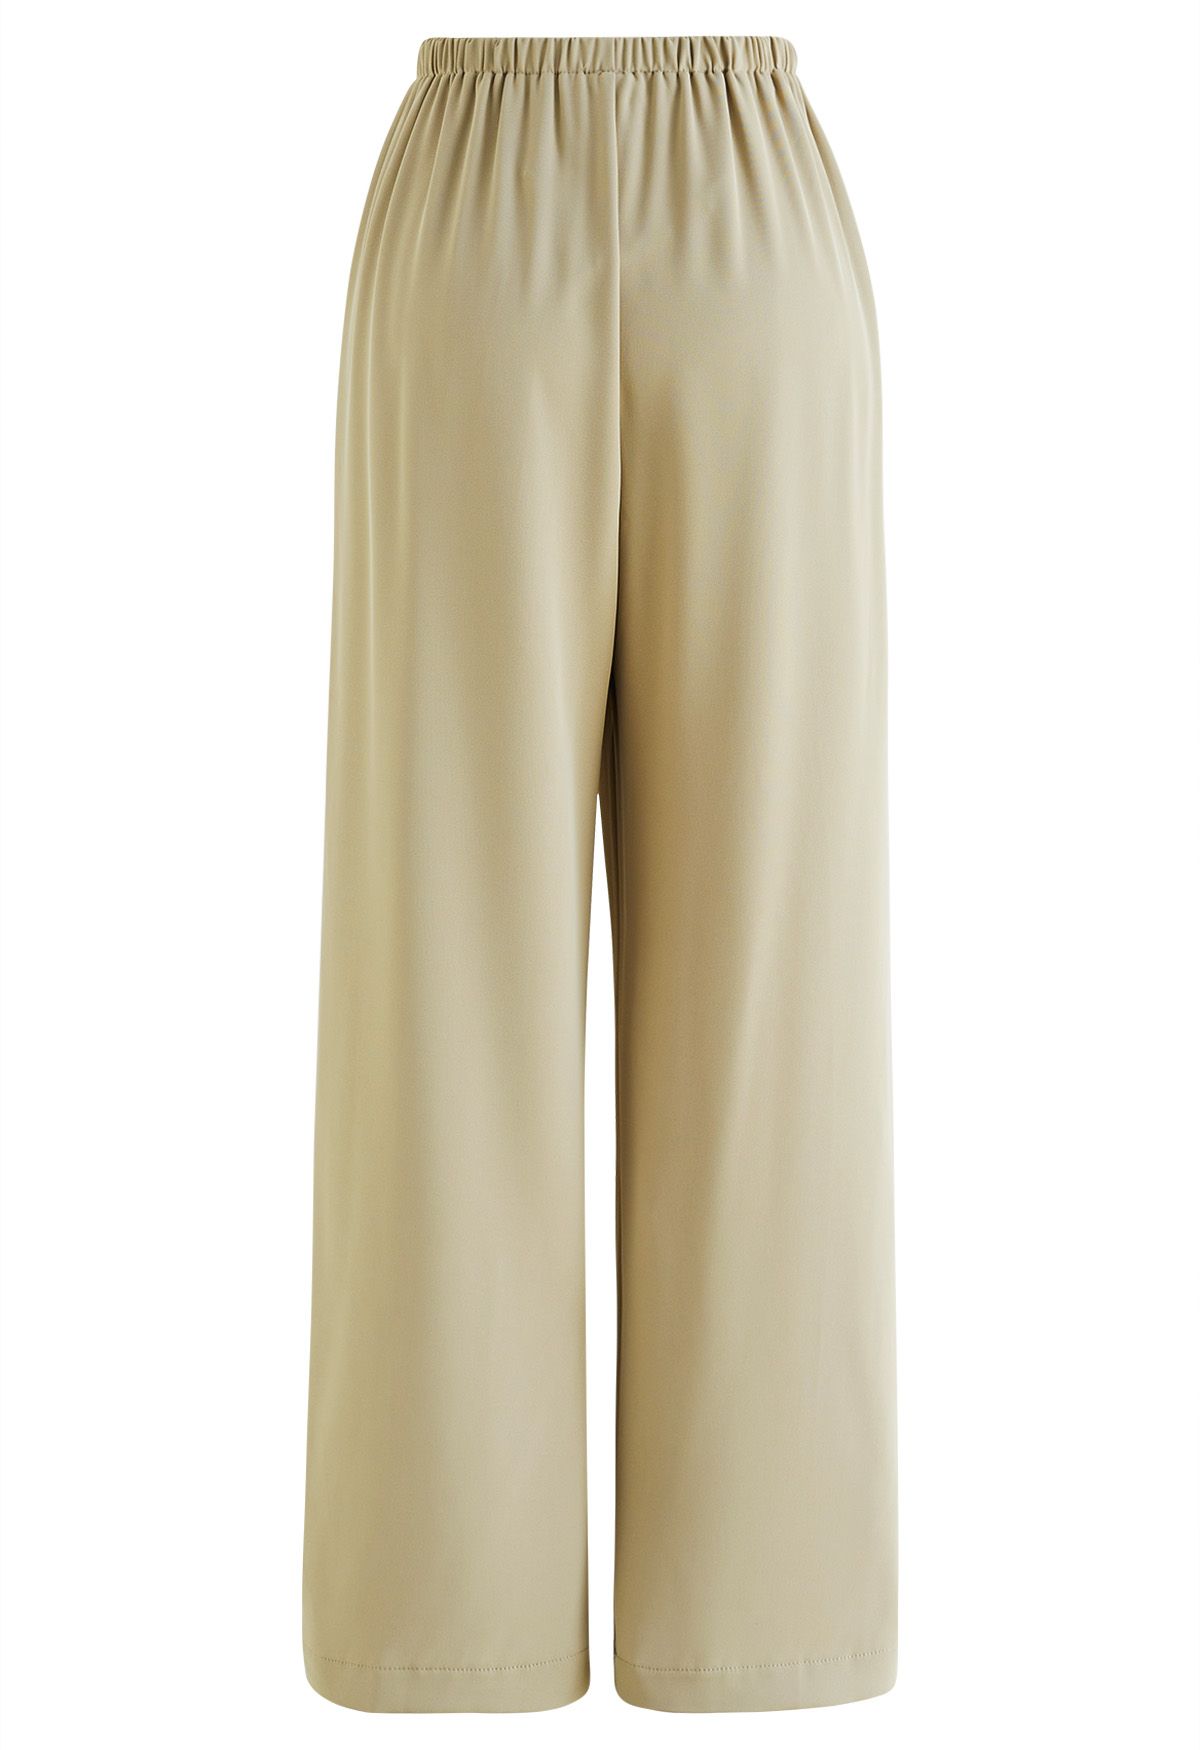 Smooth Satin Pull-On Pants in Light Tan